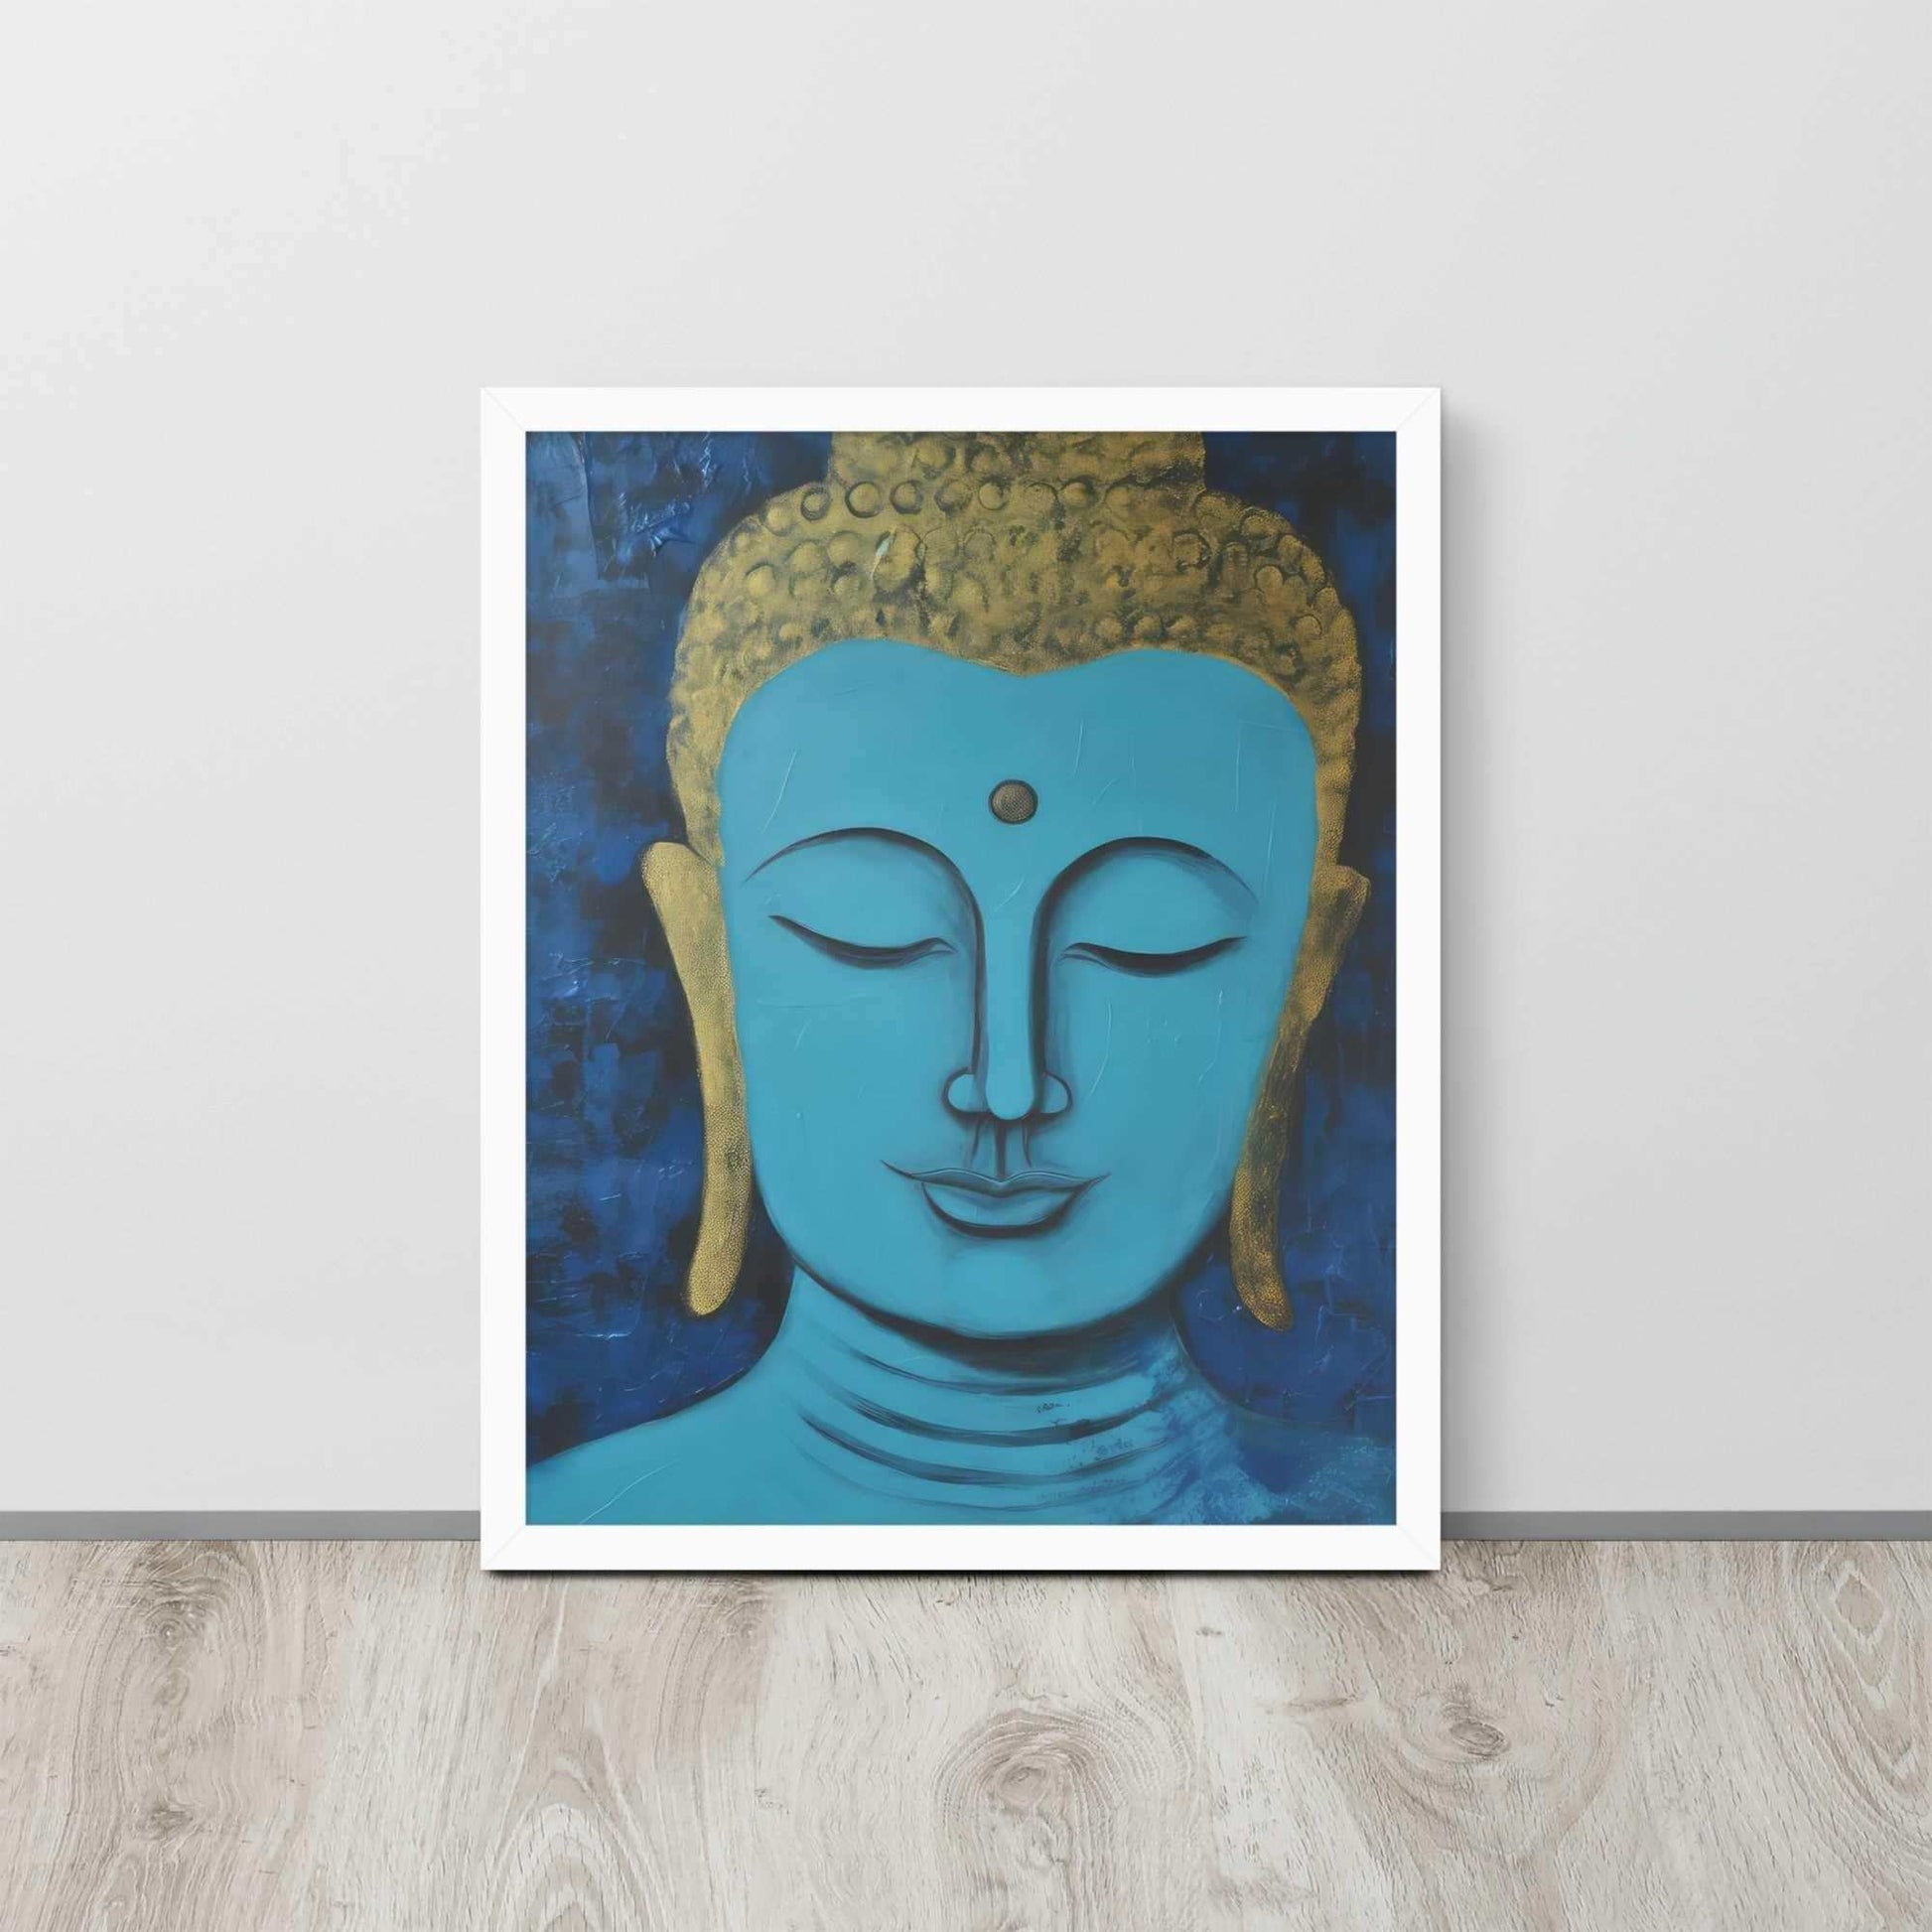 A framed poster with a white oak finish features a serene Blue Buddha Zen Wall Art with golden touches, set against a darker blue backdrop with a rich, textural finish, positioned on a light wooden floor by a plain white wall.